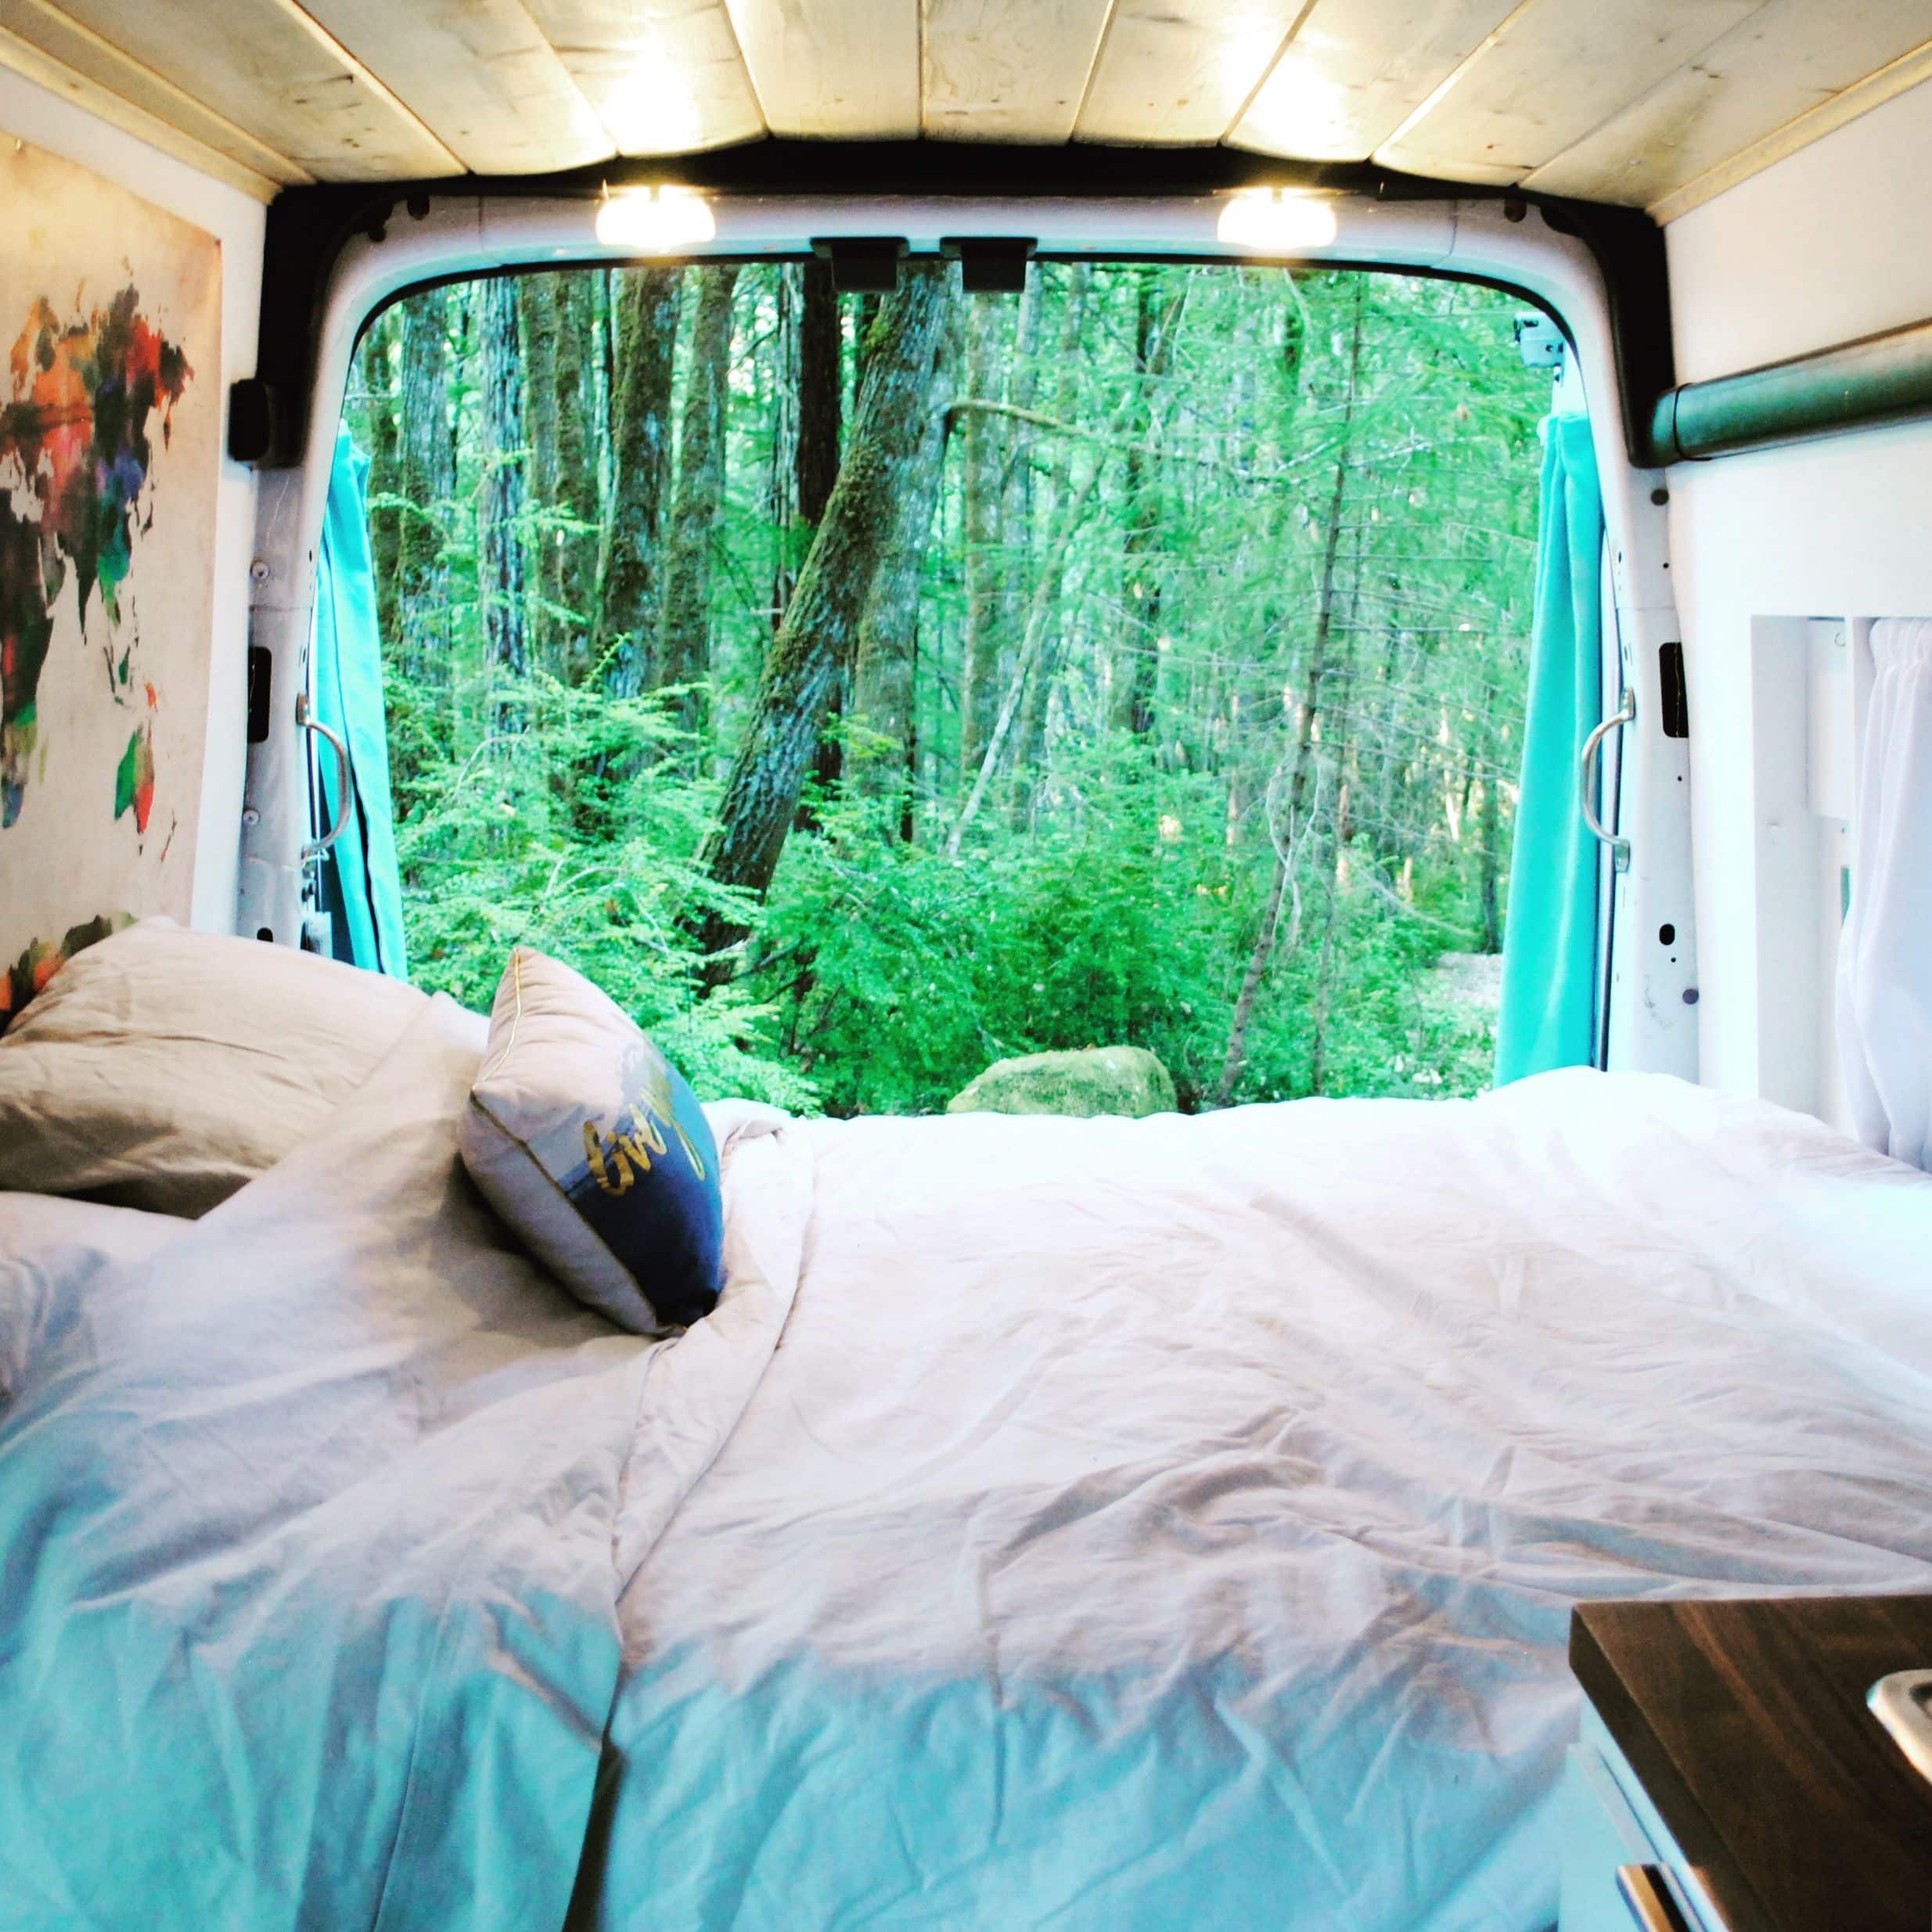 Camper Van Rental! Beautifully customized with livability and ...